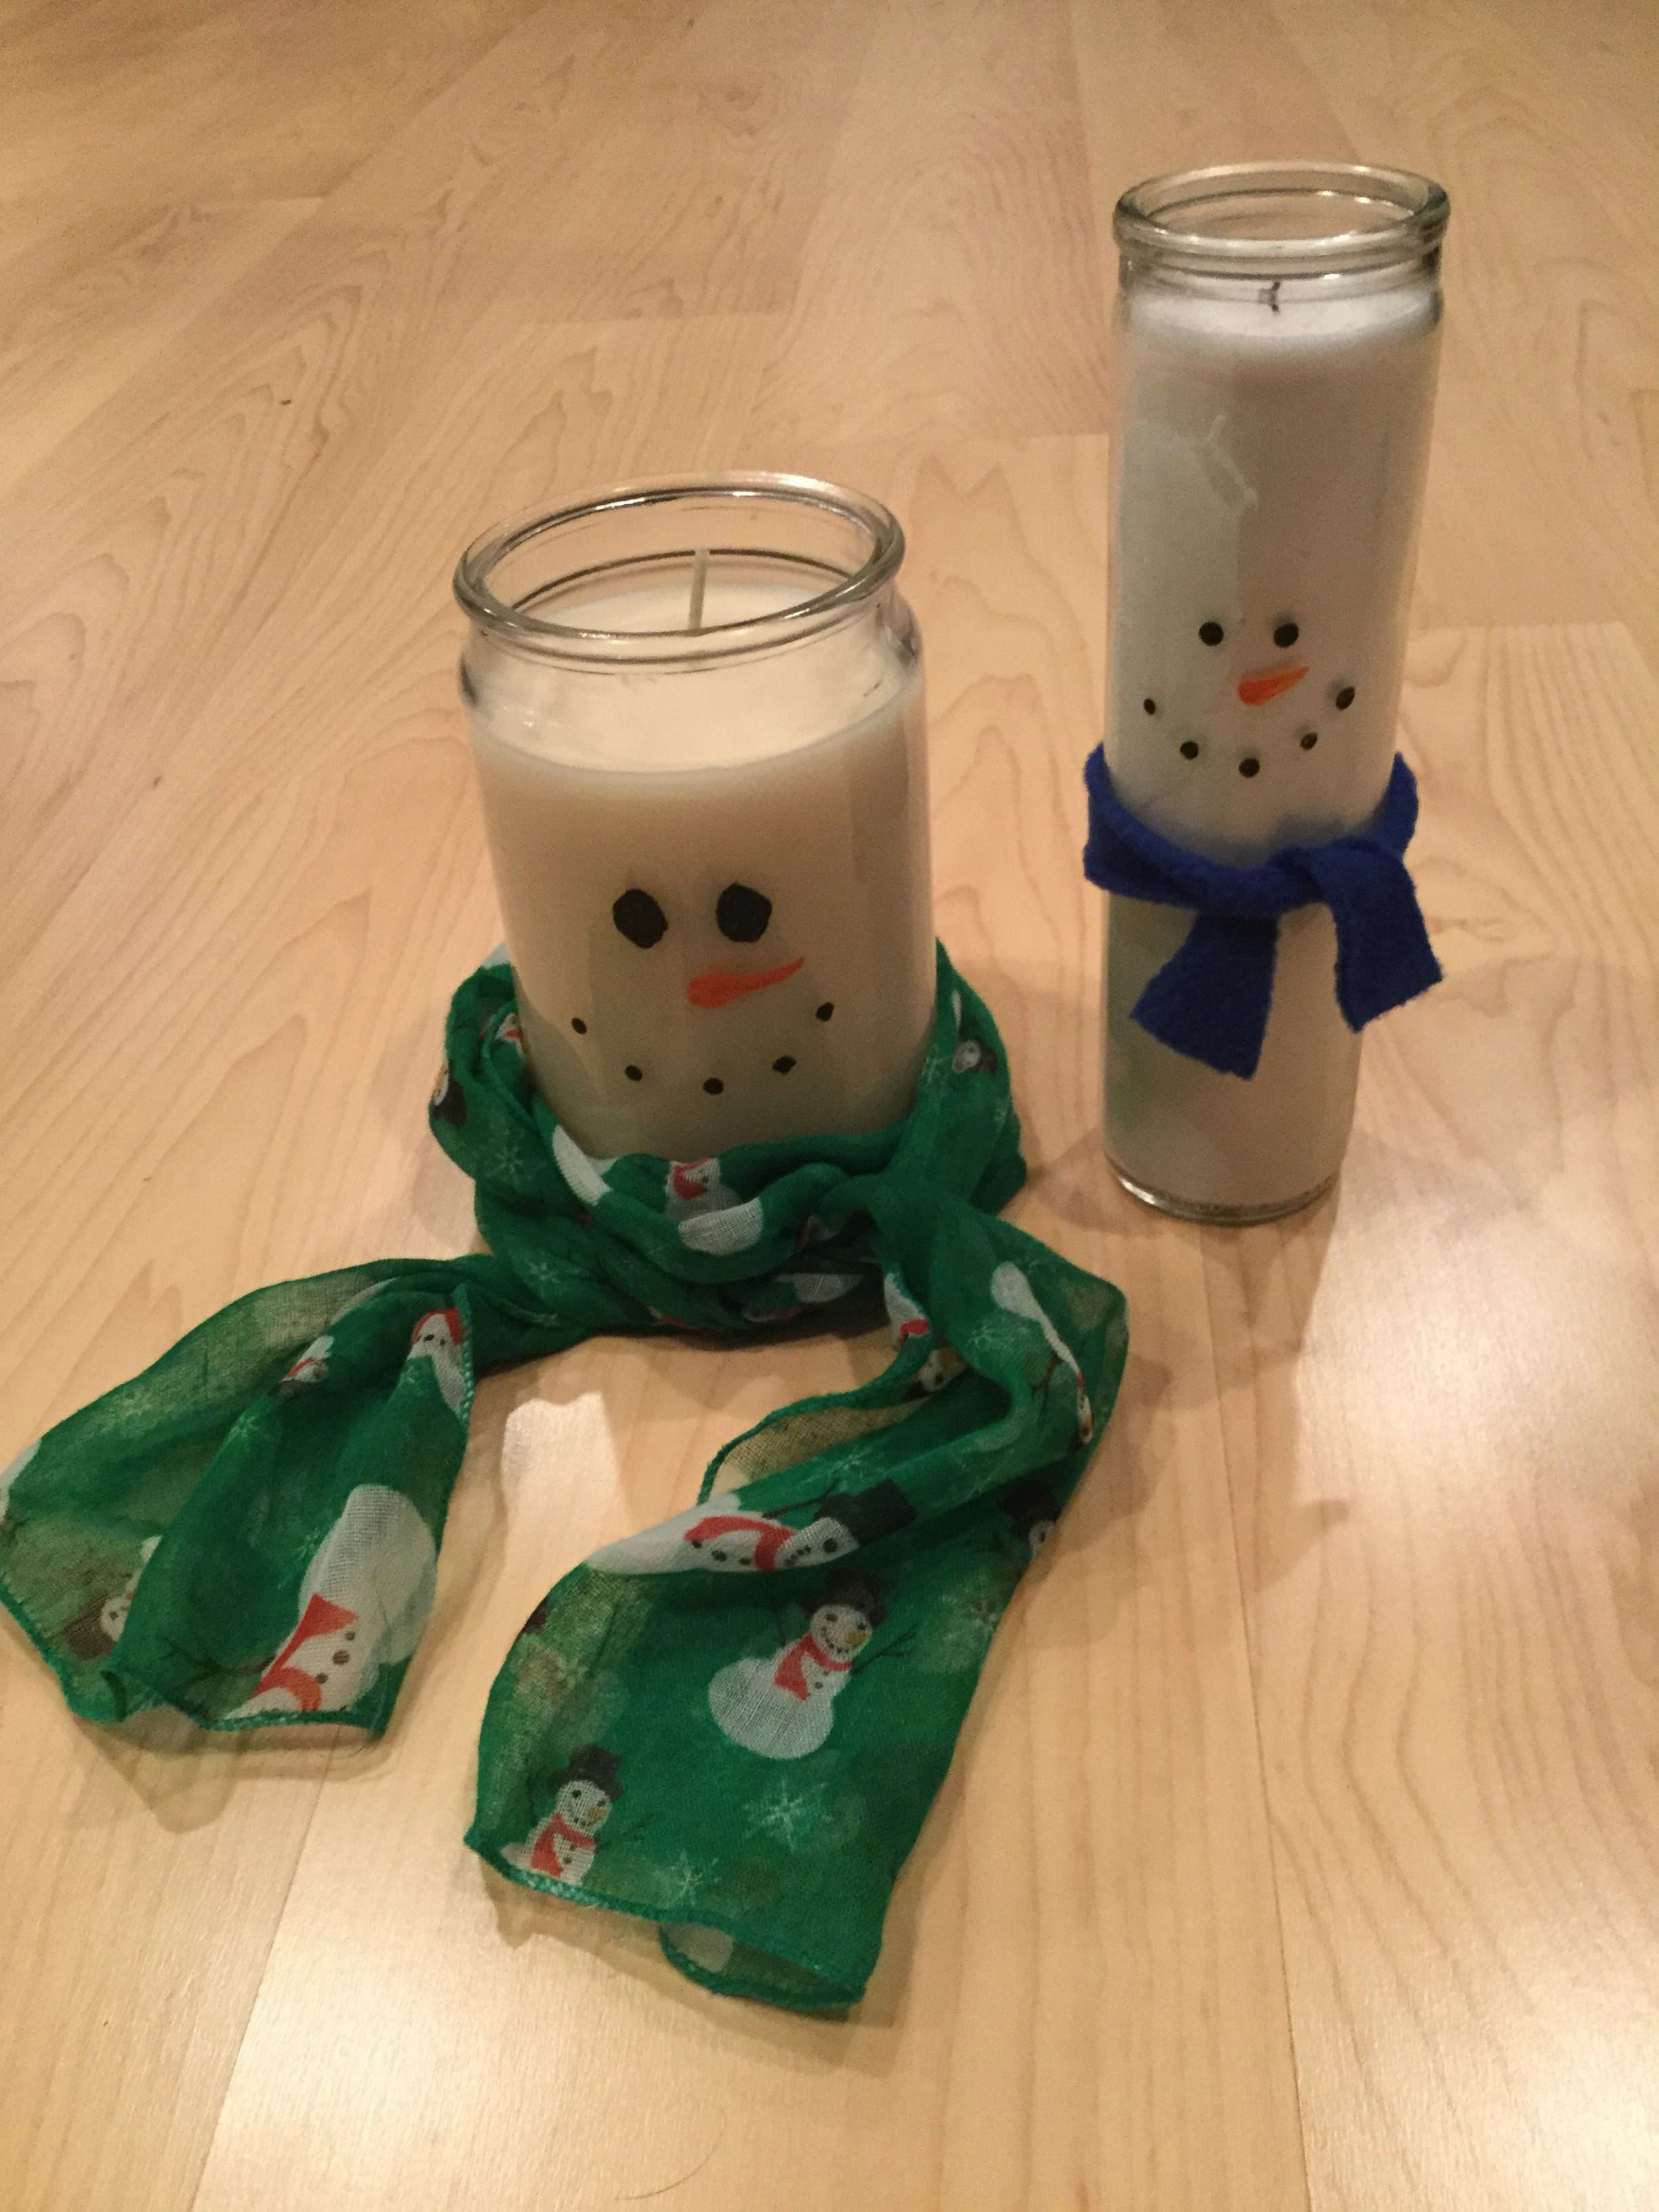 Optional – cut a small piece of fleece to wrap around your candle as a scarf. Another option is to buy a scarf and wrap it around the base of a bigger candle. Then the scarf can be used by whomever you are giving it to as well.